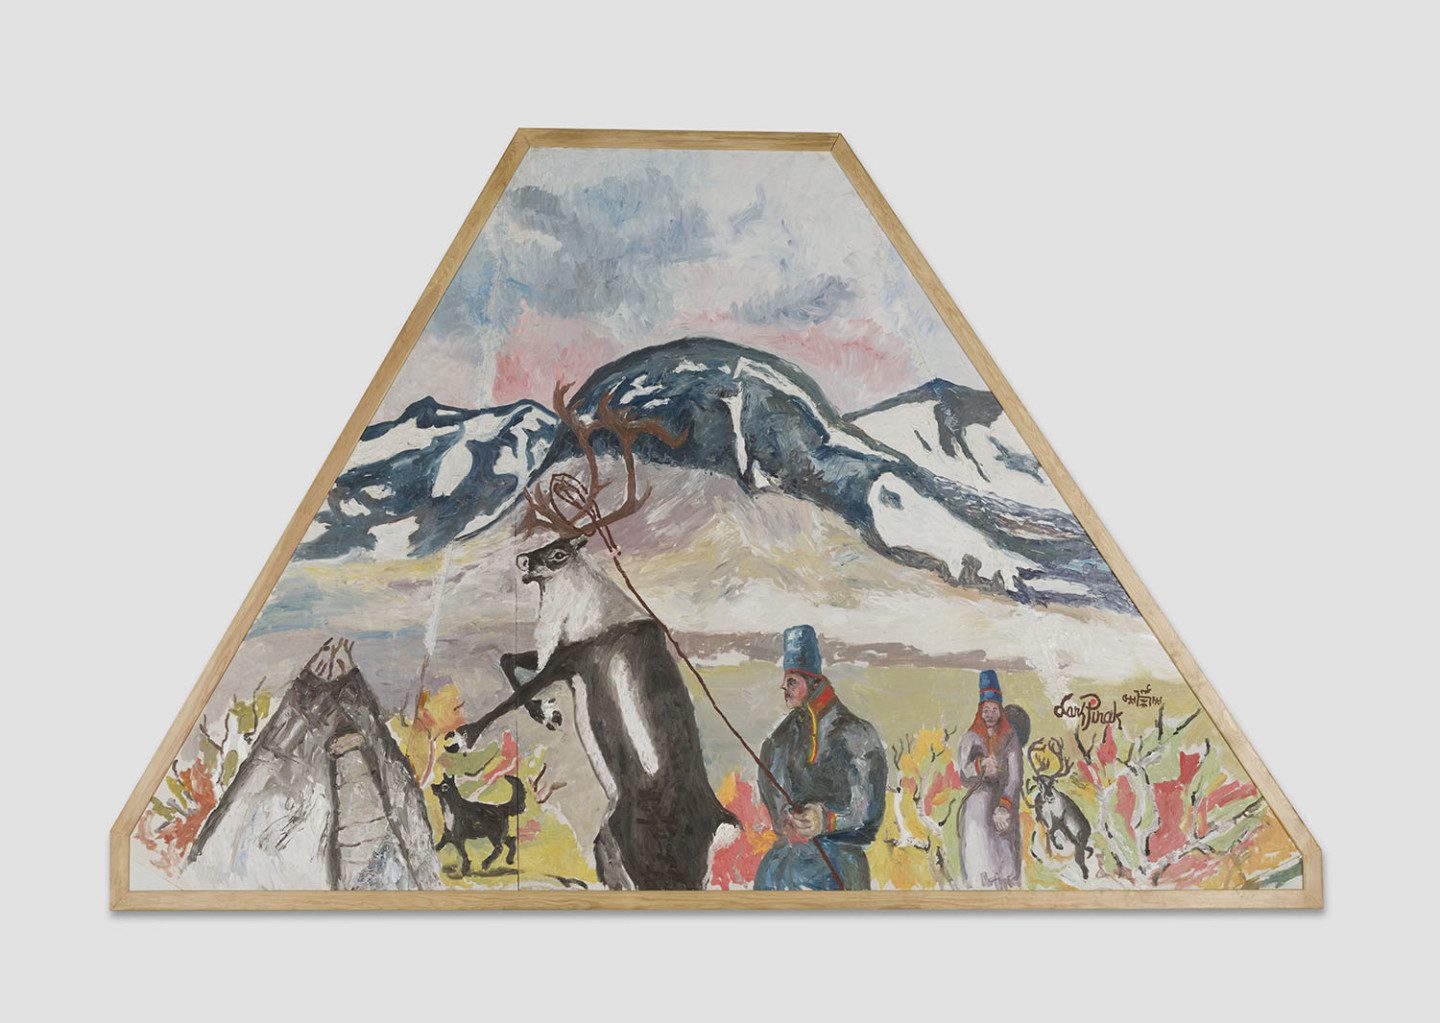 Painting of a northern landscape, reindeer and reindeer herders in the foreground and fire in the background